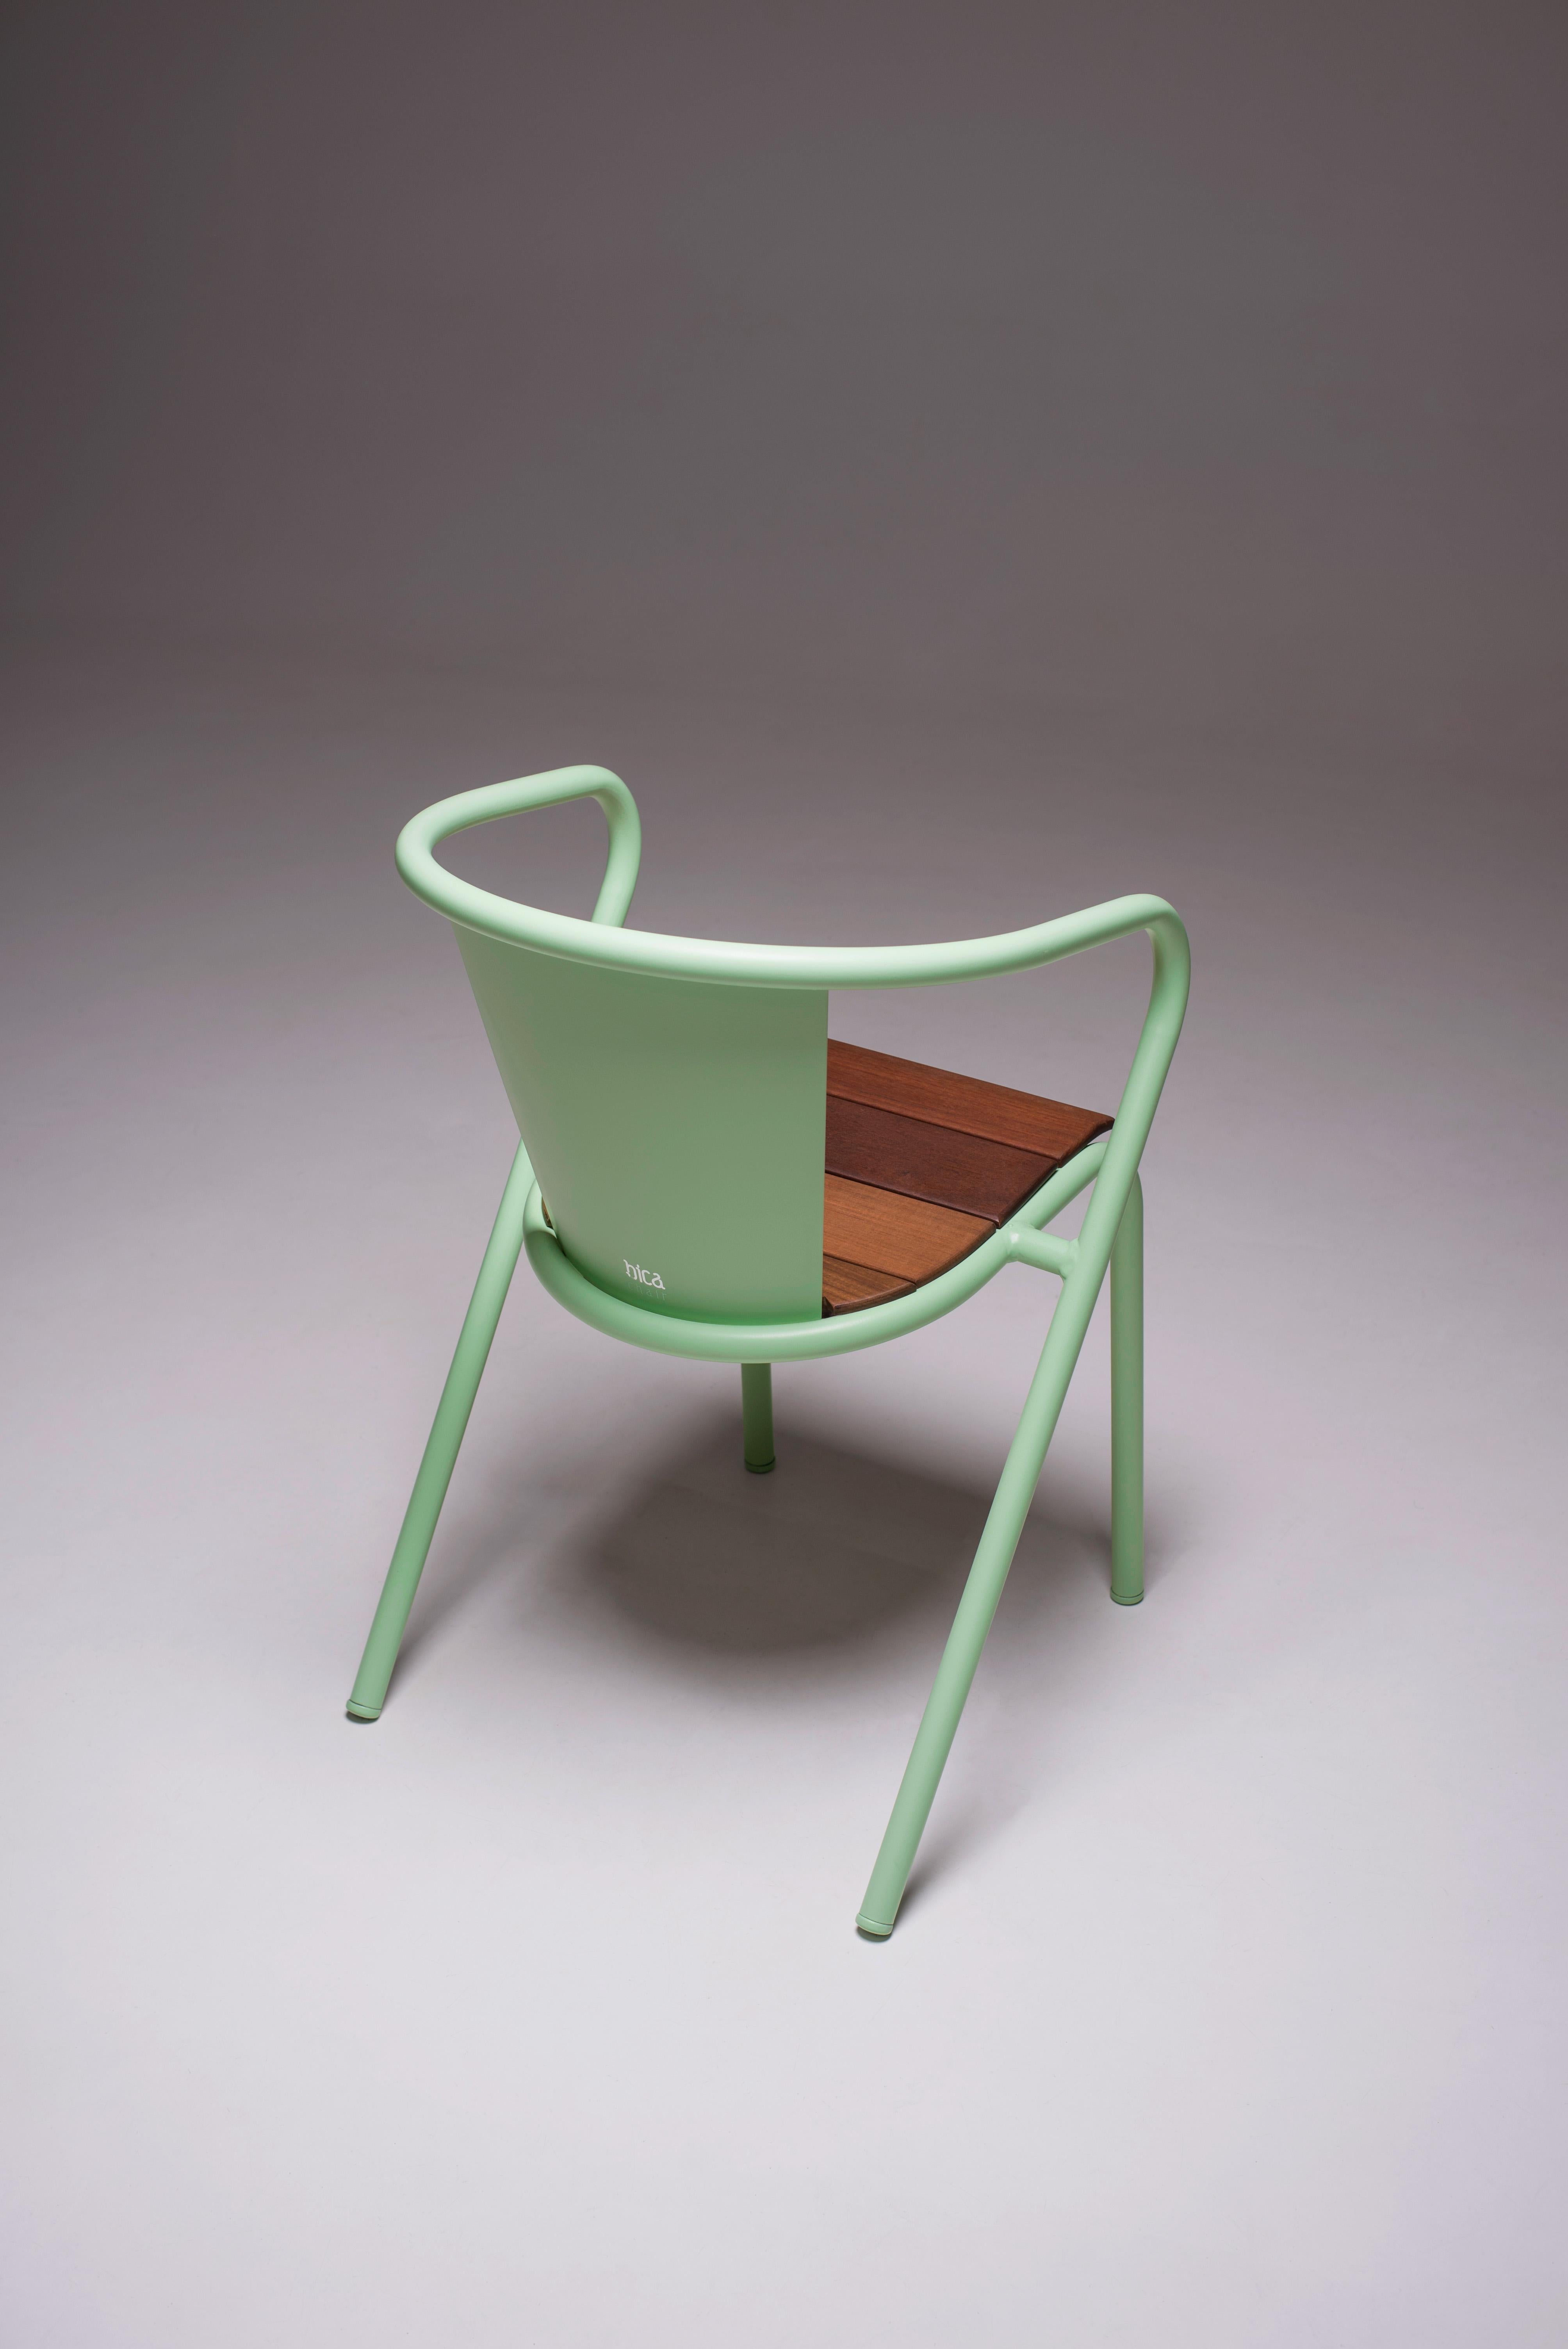 BICAchair is a sustainable stackable steel armchair made for the outdoors from recycled and recyclable steel and finished with our premium selection of powder-coating colors, in this case in a Pastel green color, that transforms a Classic in